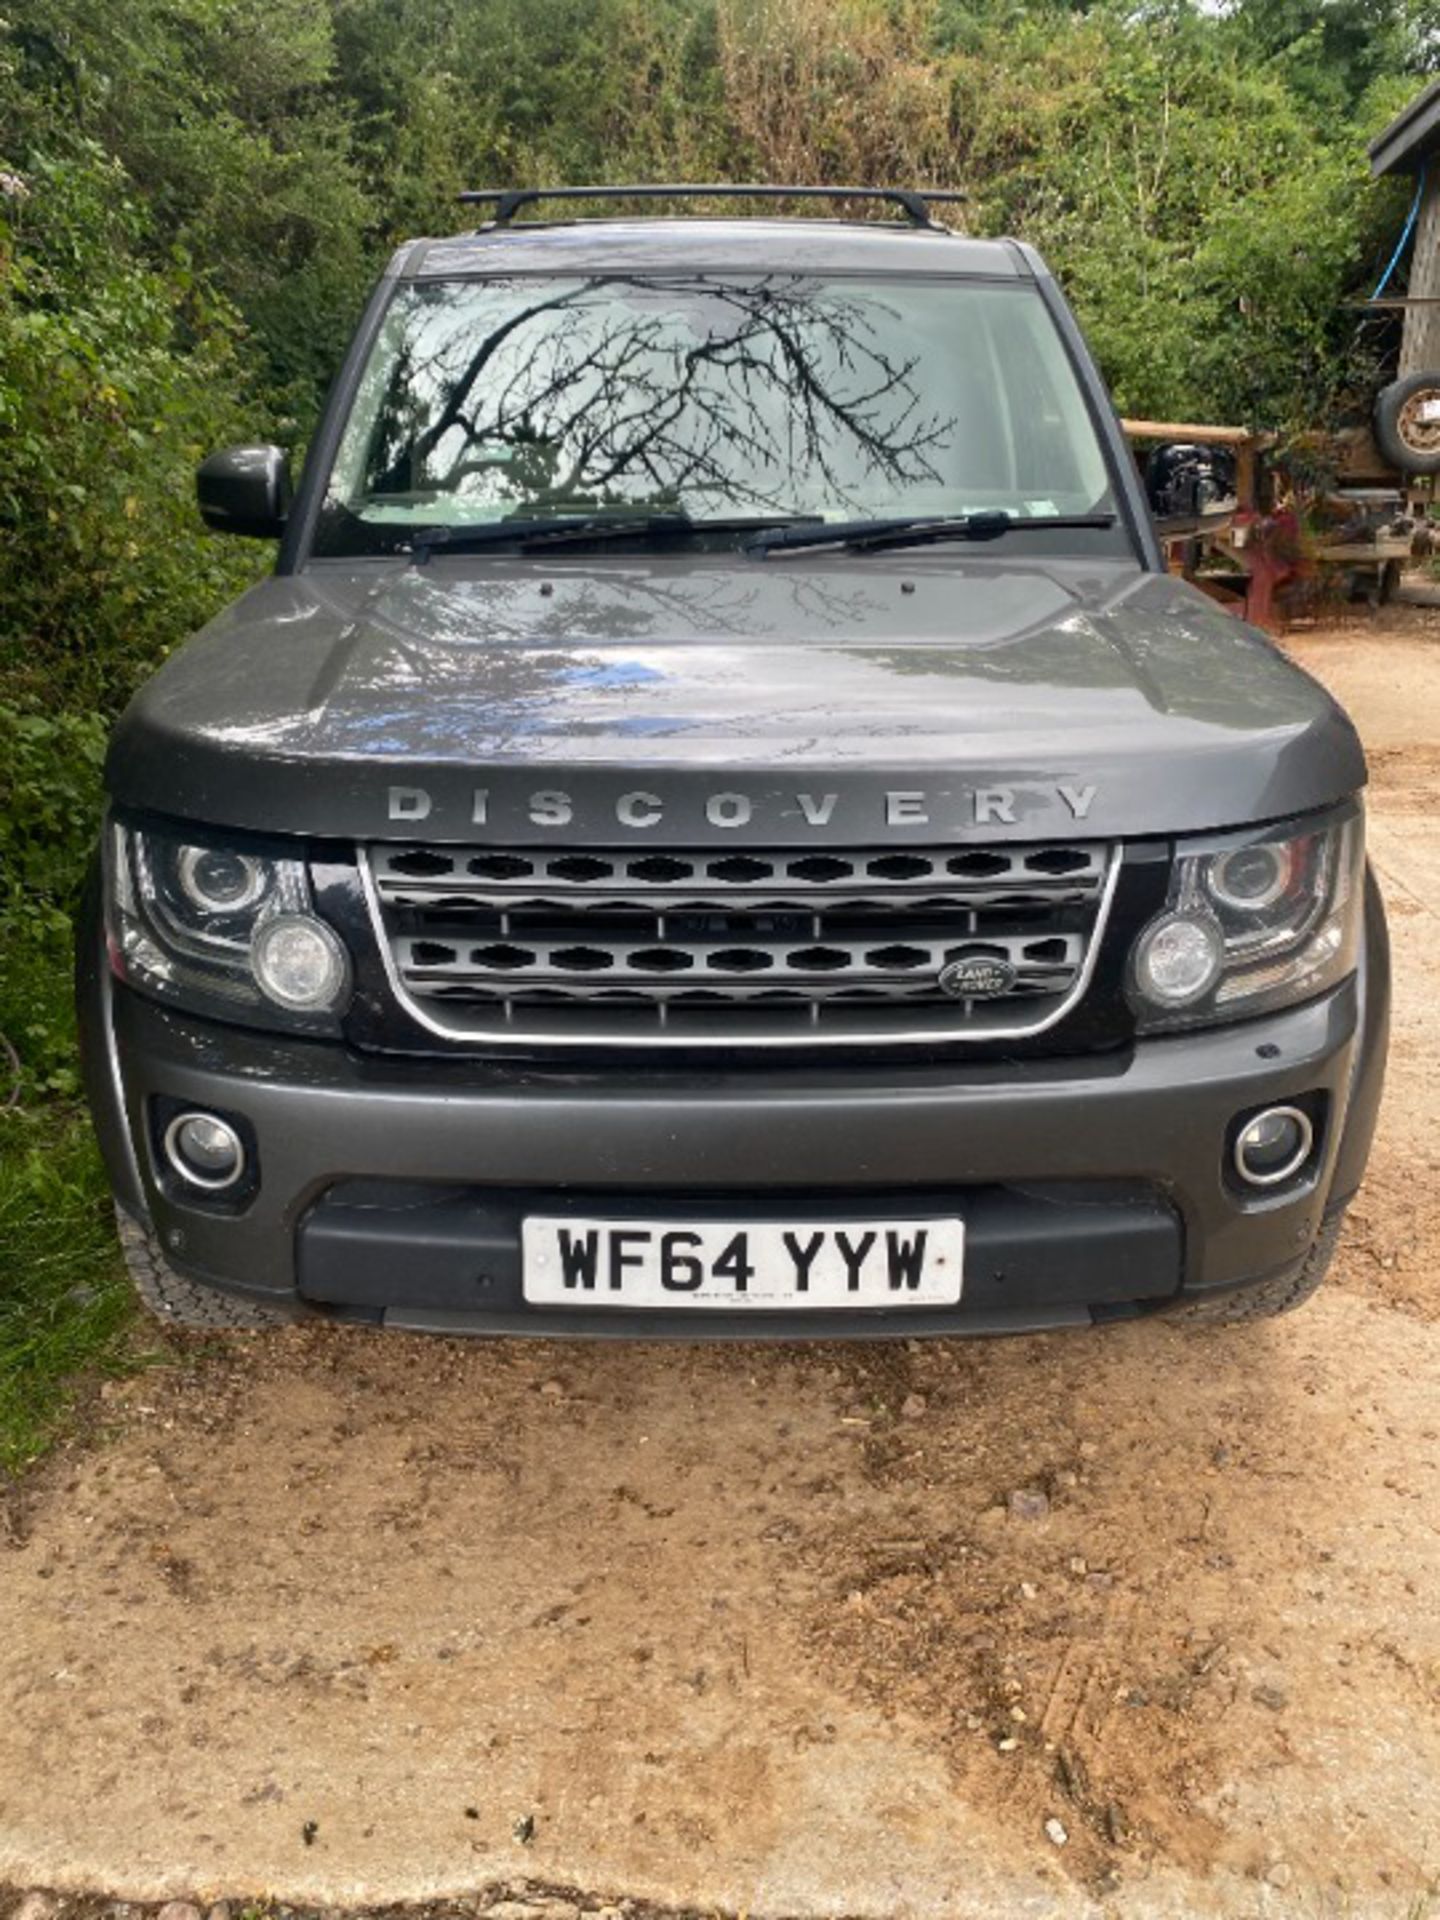 Discovery Xs Sdv6 3.0D auto commercial hardtop, 252bhp Registration no. WF64 YYW Recorded mileage: - Image 2 of 15